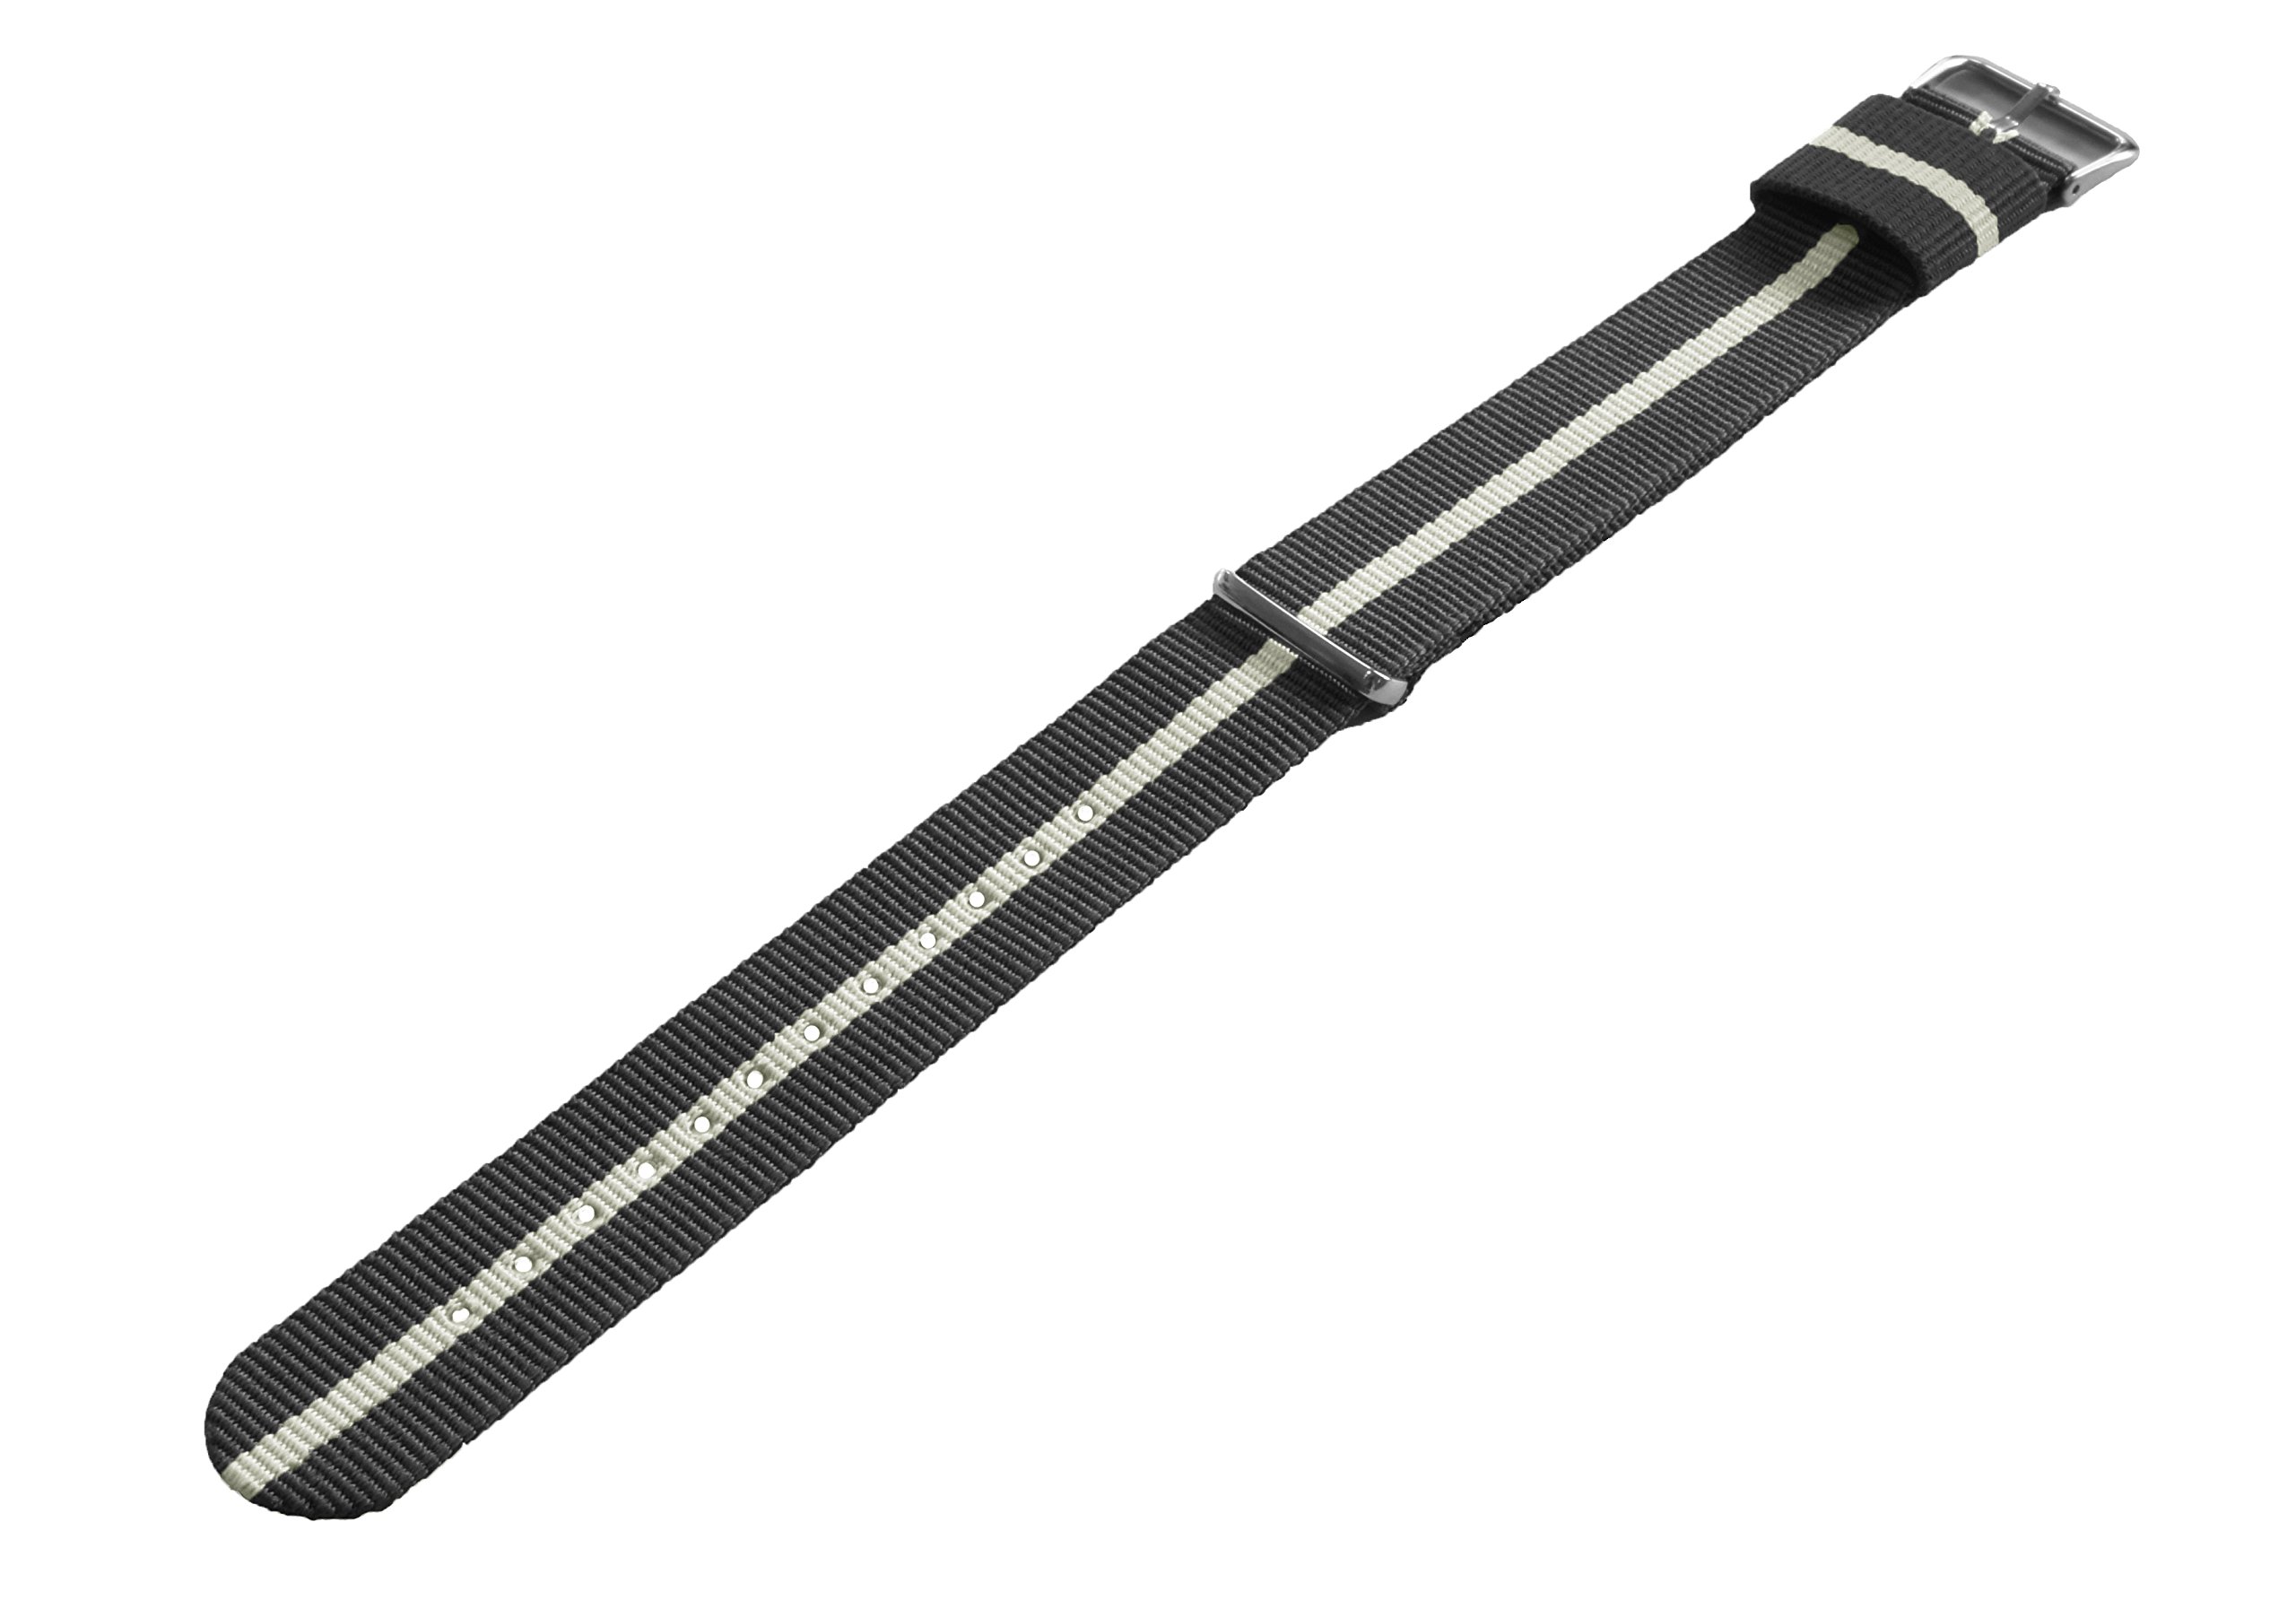 BARTON WATCH BANDS - Ballistic Nylon NATO® Style Straps - Choice of Color, Length & Width (18mm, 20mm, 22mm or 24mm)